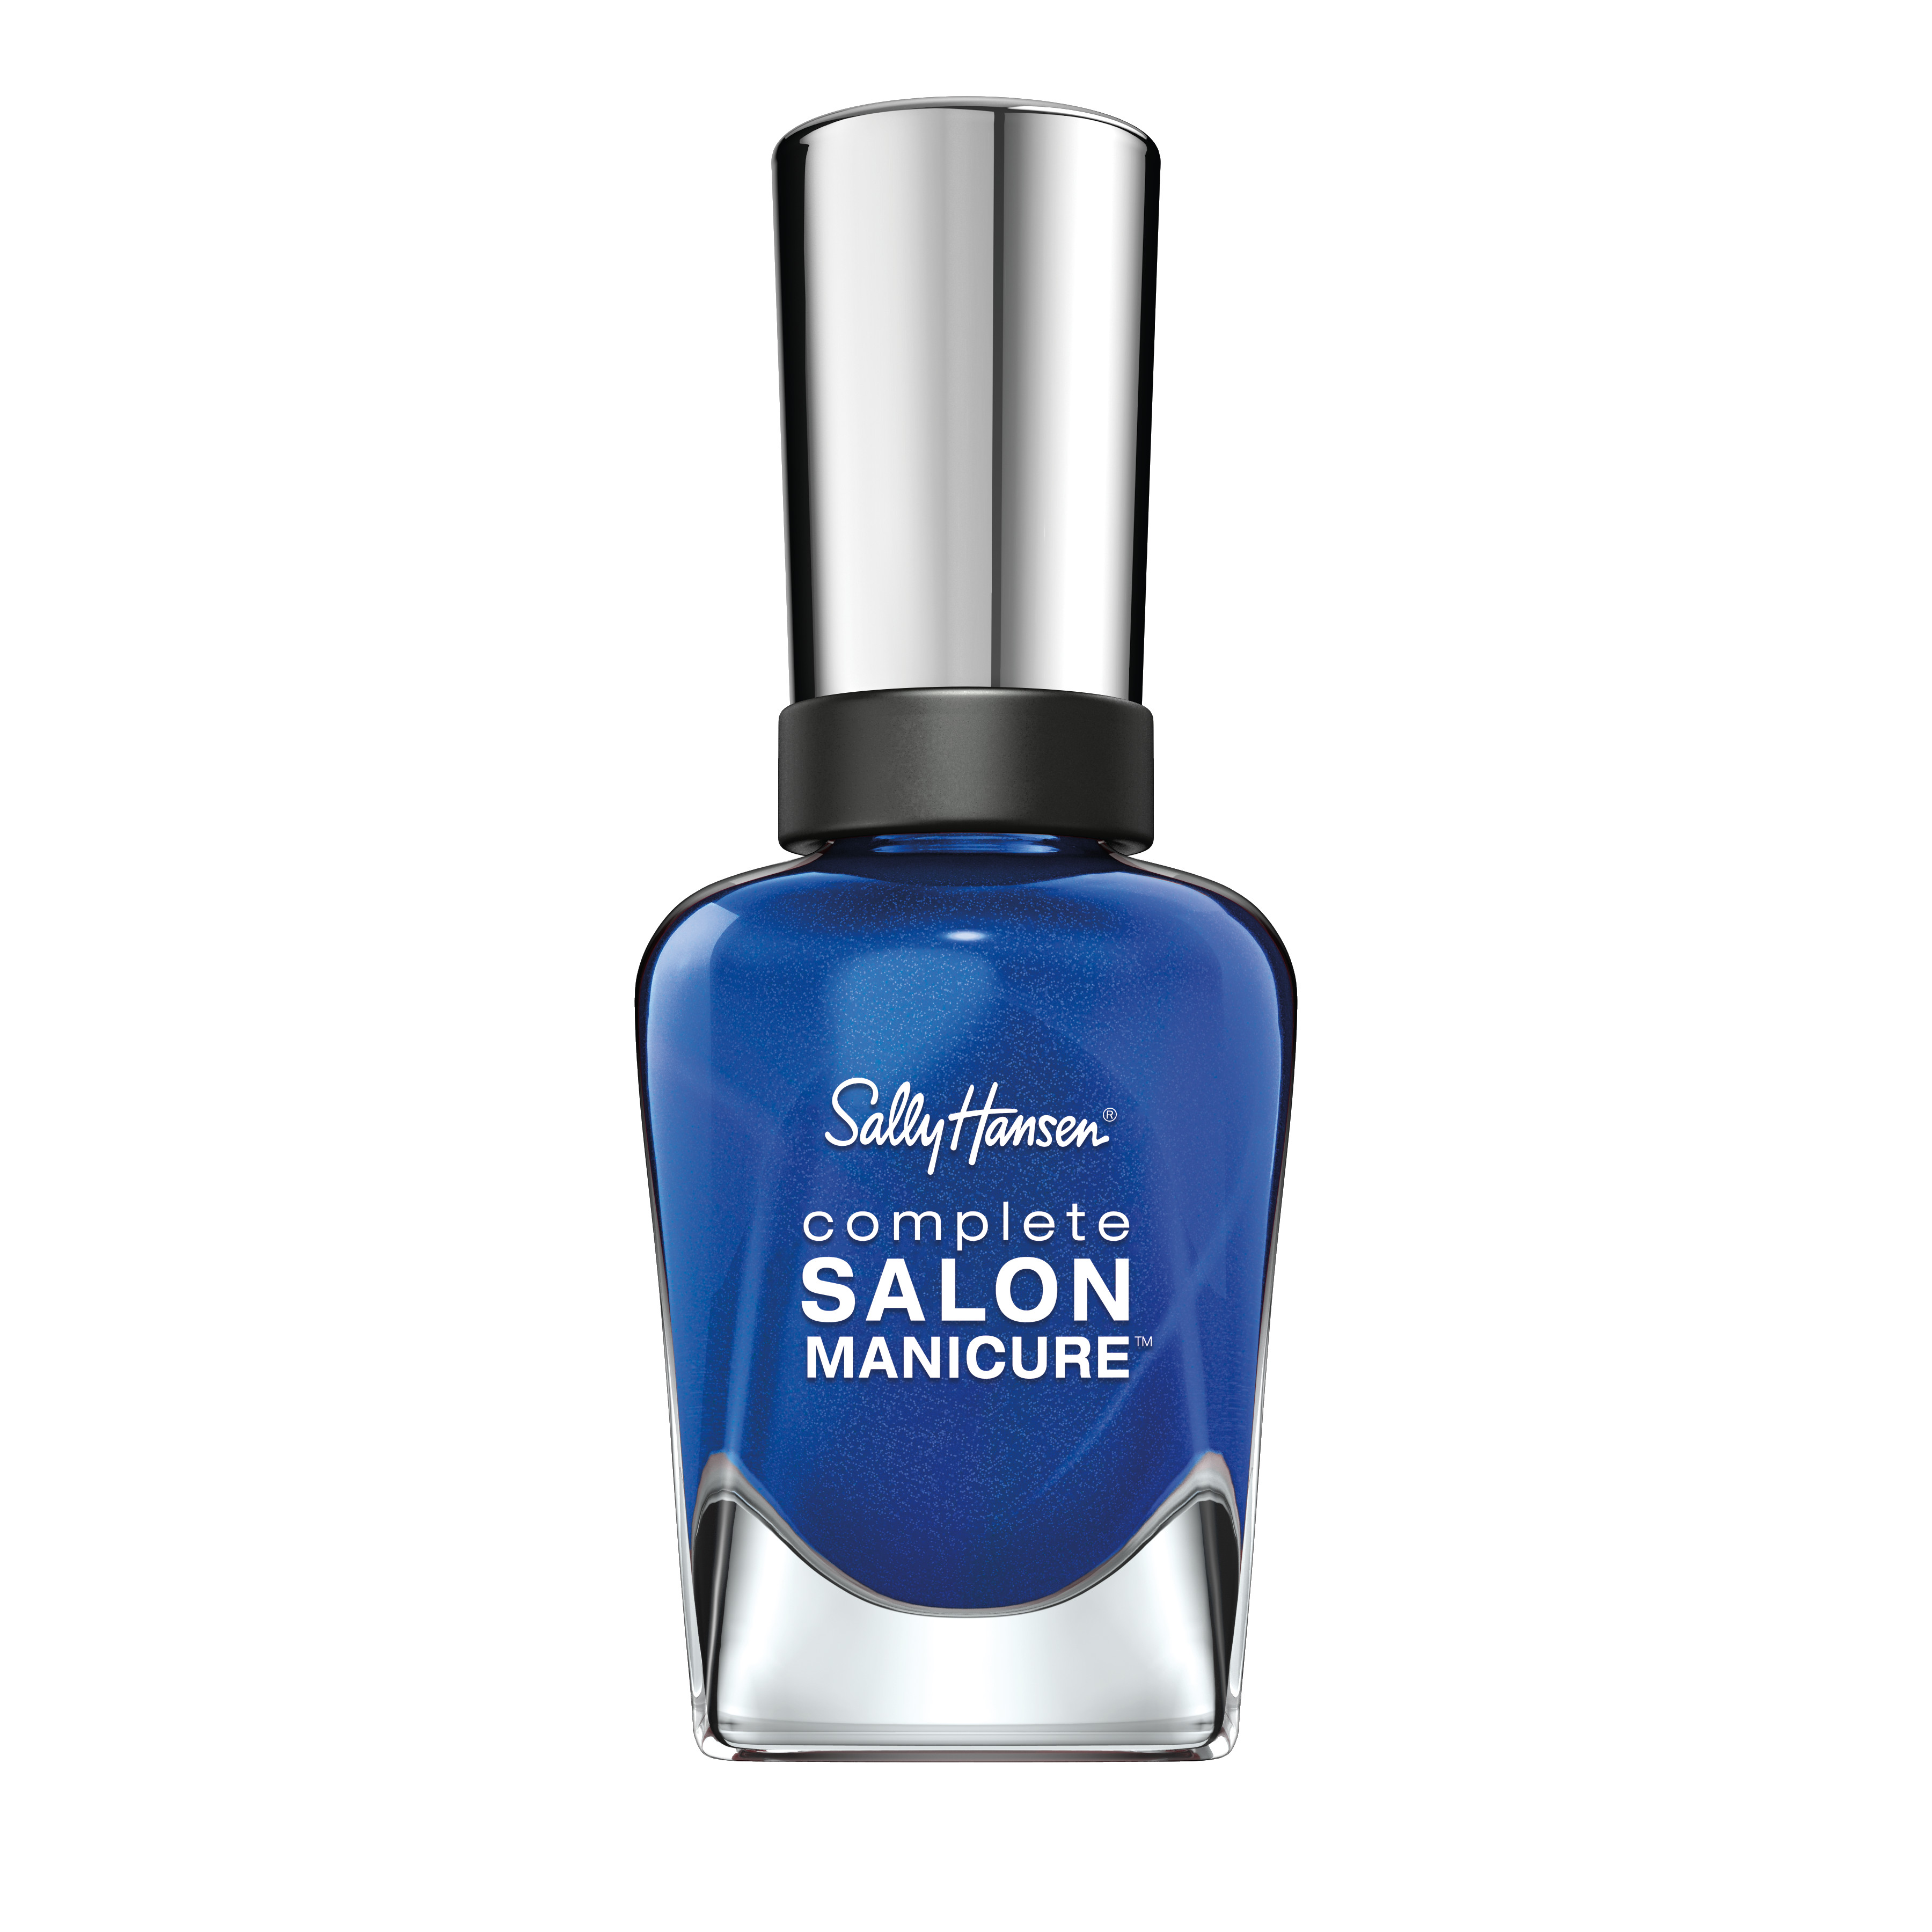 Sally Hansen Complete Salon Manicure Nail Color, Blue My Mind - image 1 of 3